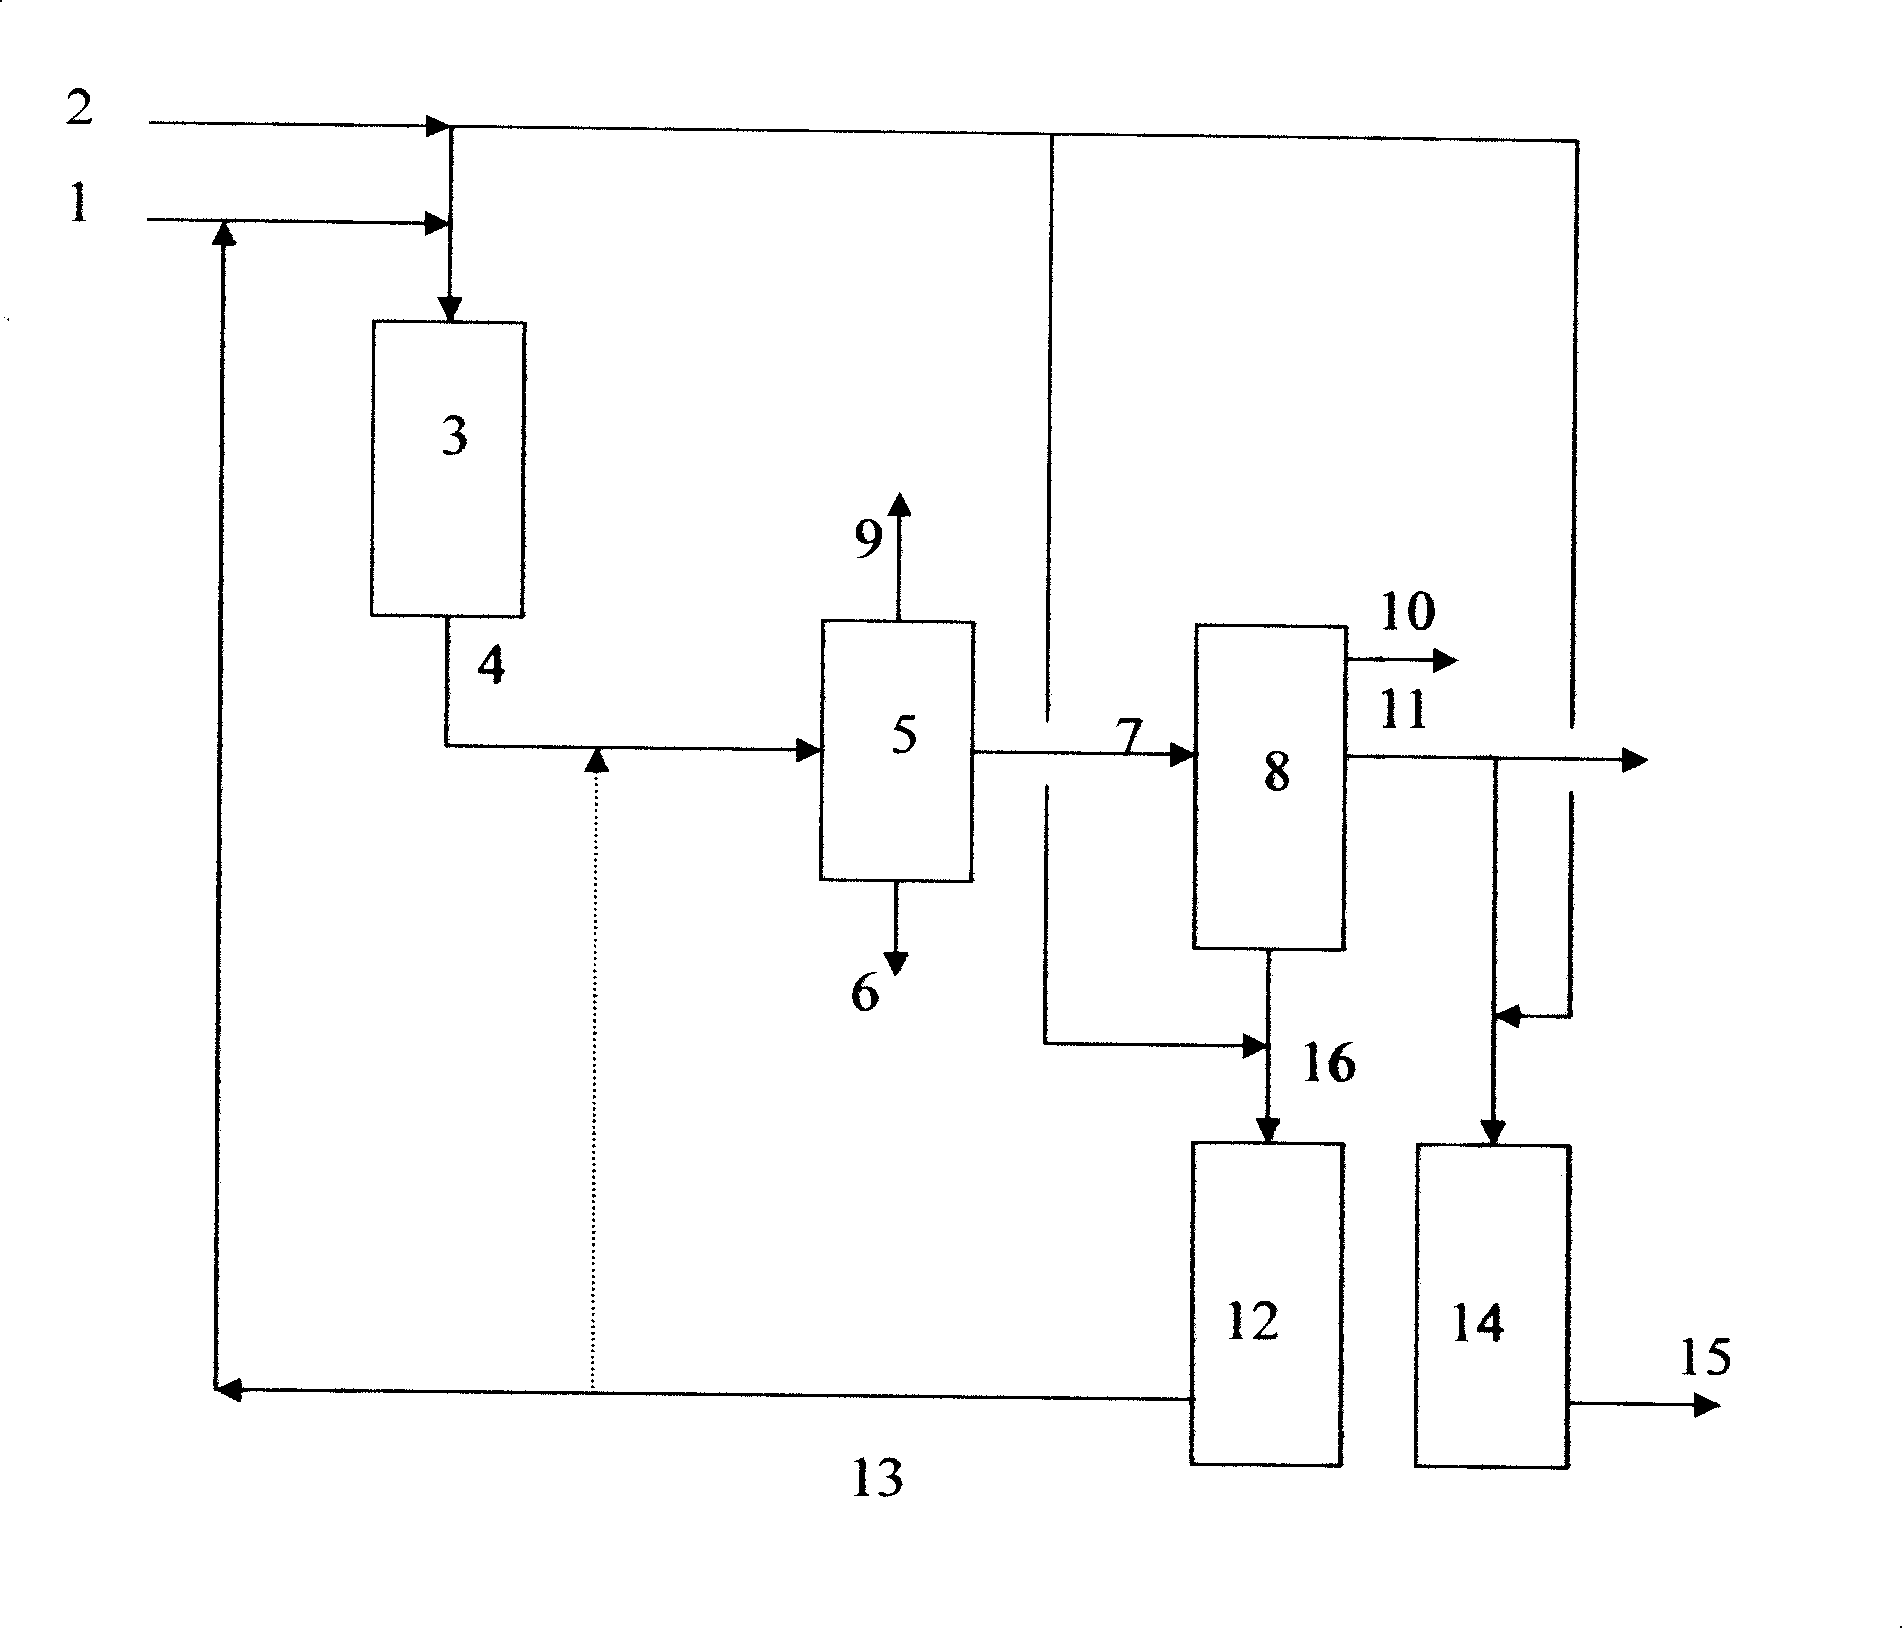 Method for producing lightweight fuel oil by coal tar heavy fractioning hydrogenation